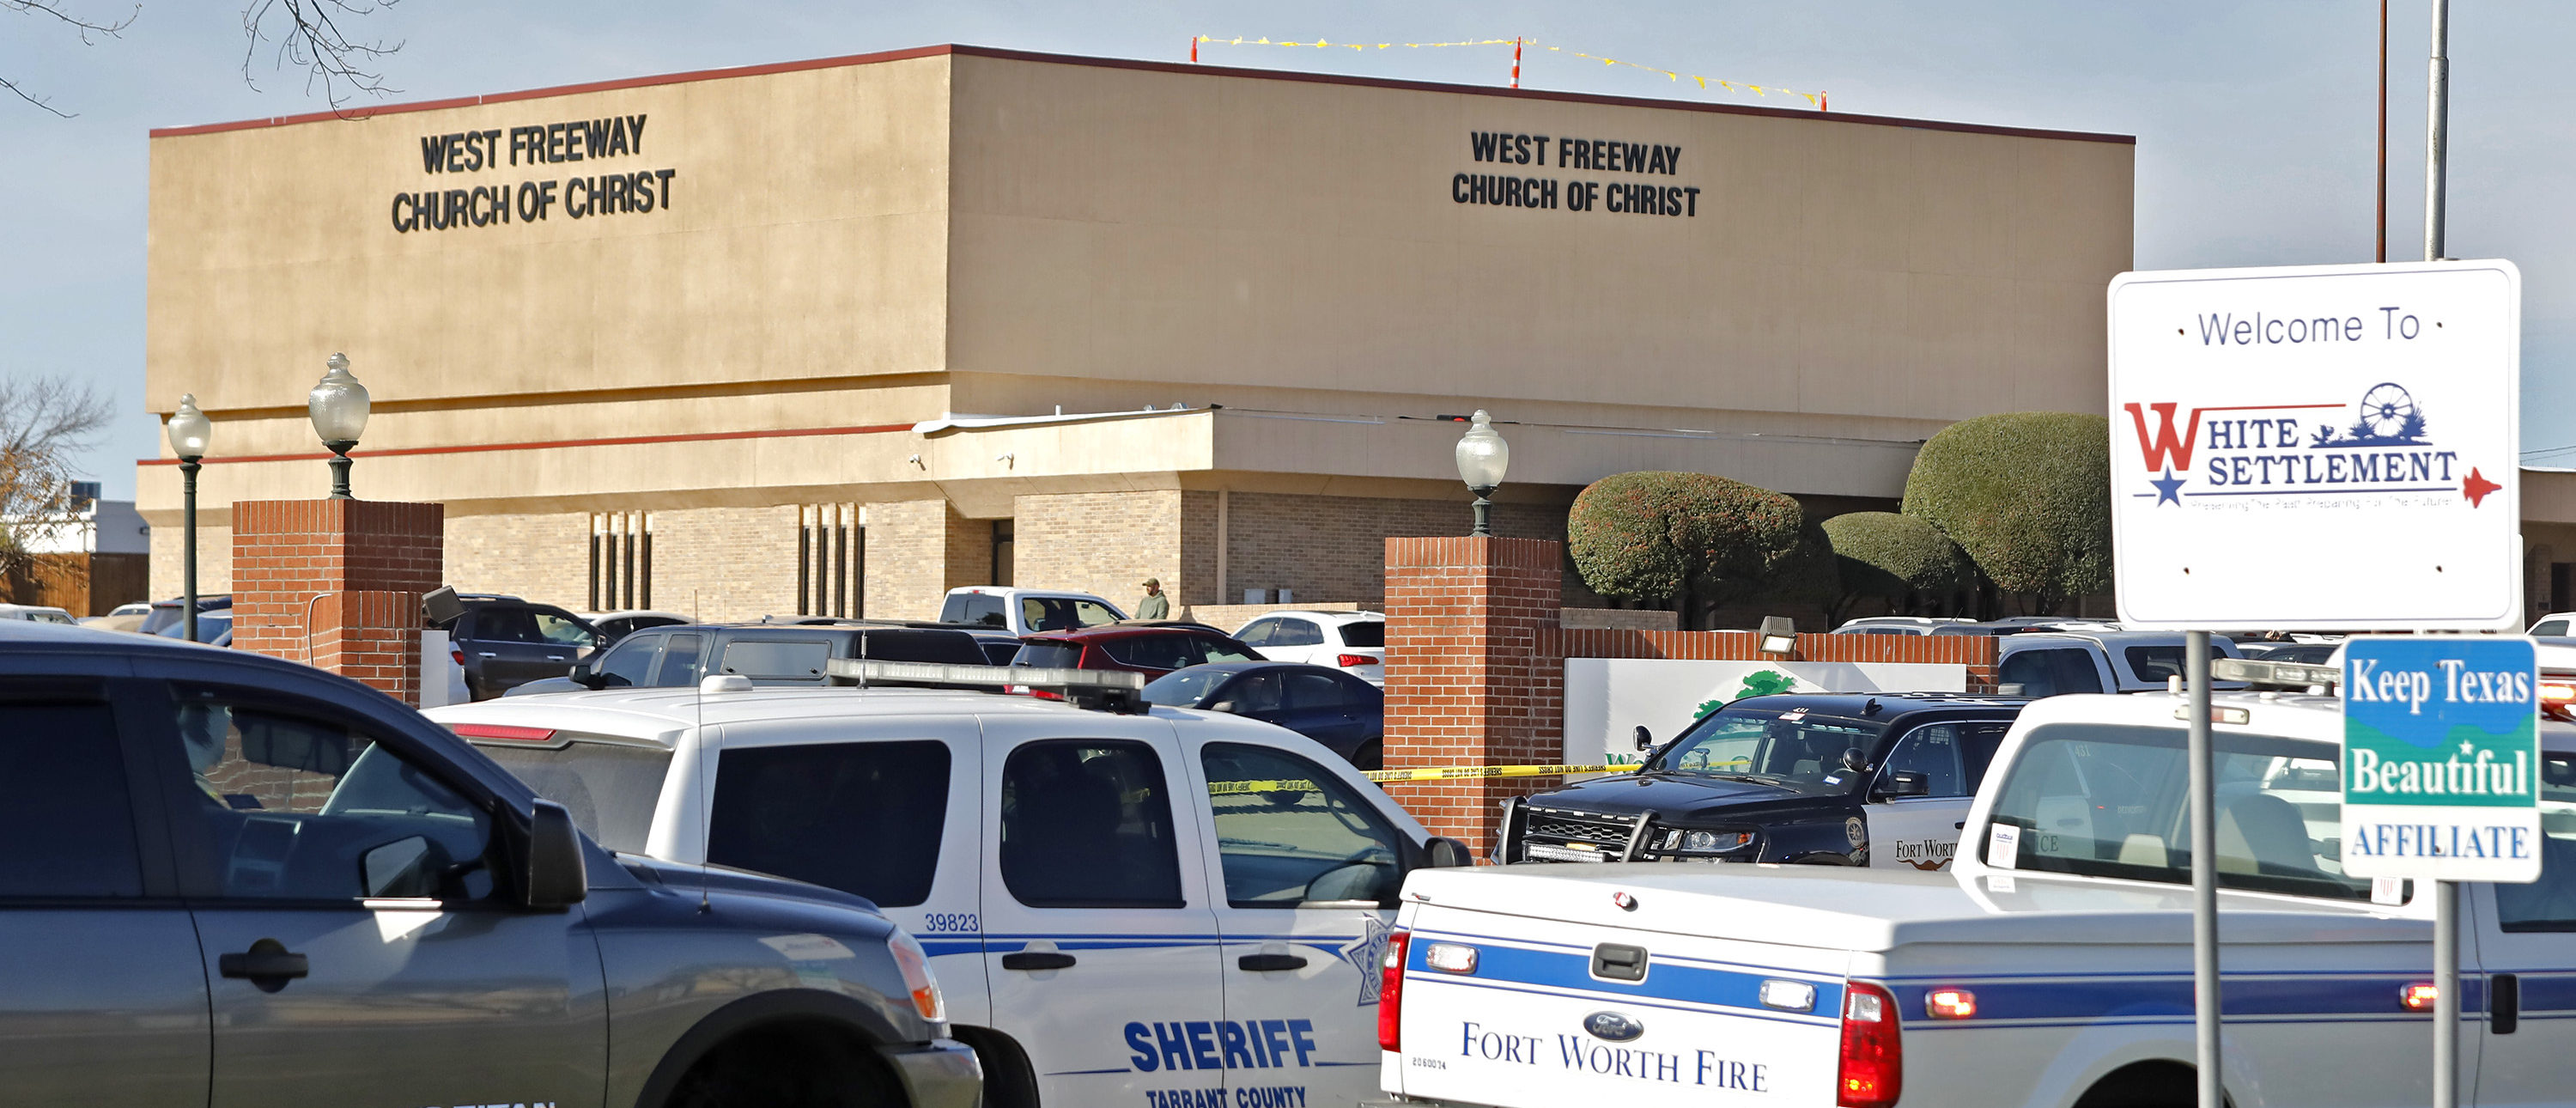 WHITE SETTLEMENT, TX - DECEMBER 29: Law enforcement vehicles are parked outside West Freeway Church of Christ where a shooting took place at the morning service on December 29, 2019 in White Settlement, Texas. The gunman was killed by armed members of the church after he opened fire during Sunday services. According to reports, a security guard was killed by the gunman. (Photo by Stewart F. House/Getty Images)